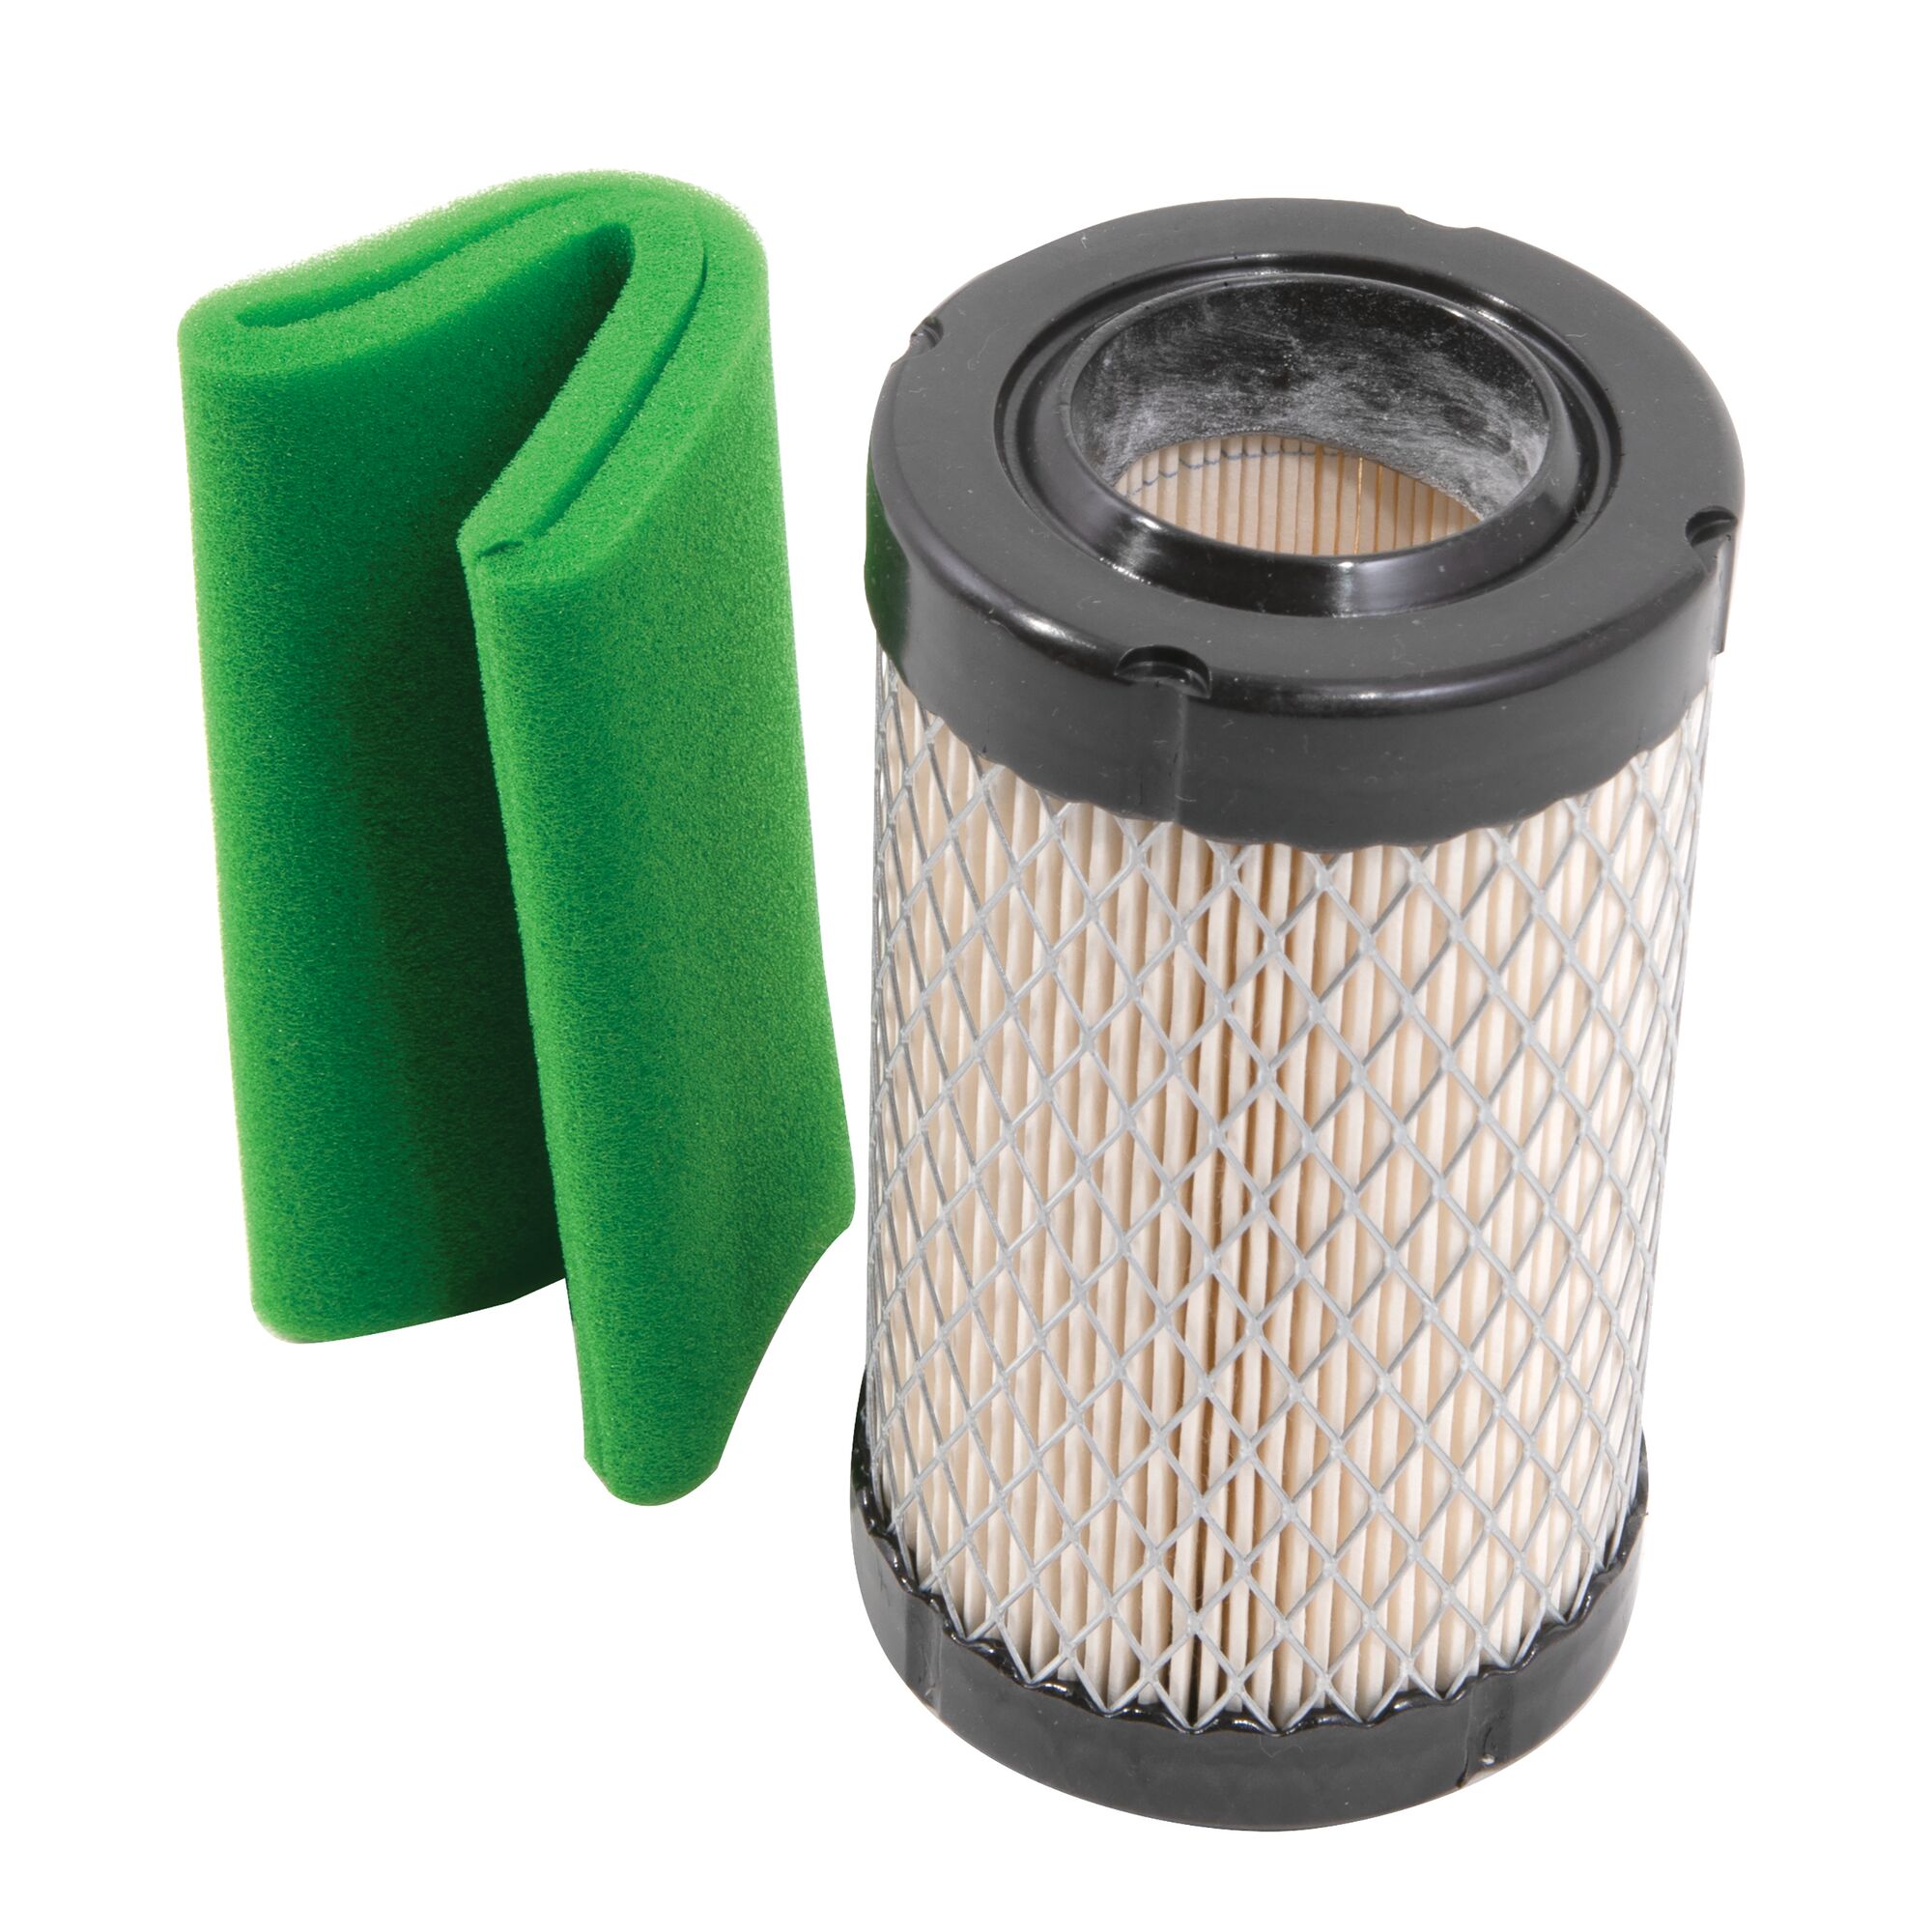 Right profile of air filter.